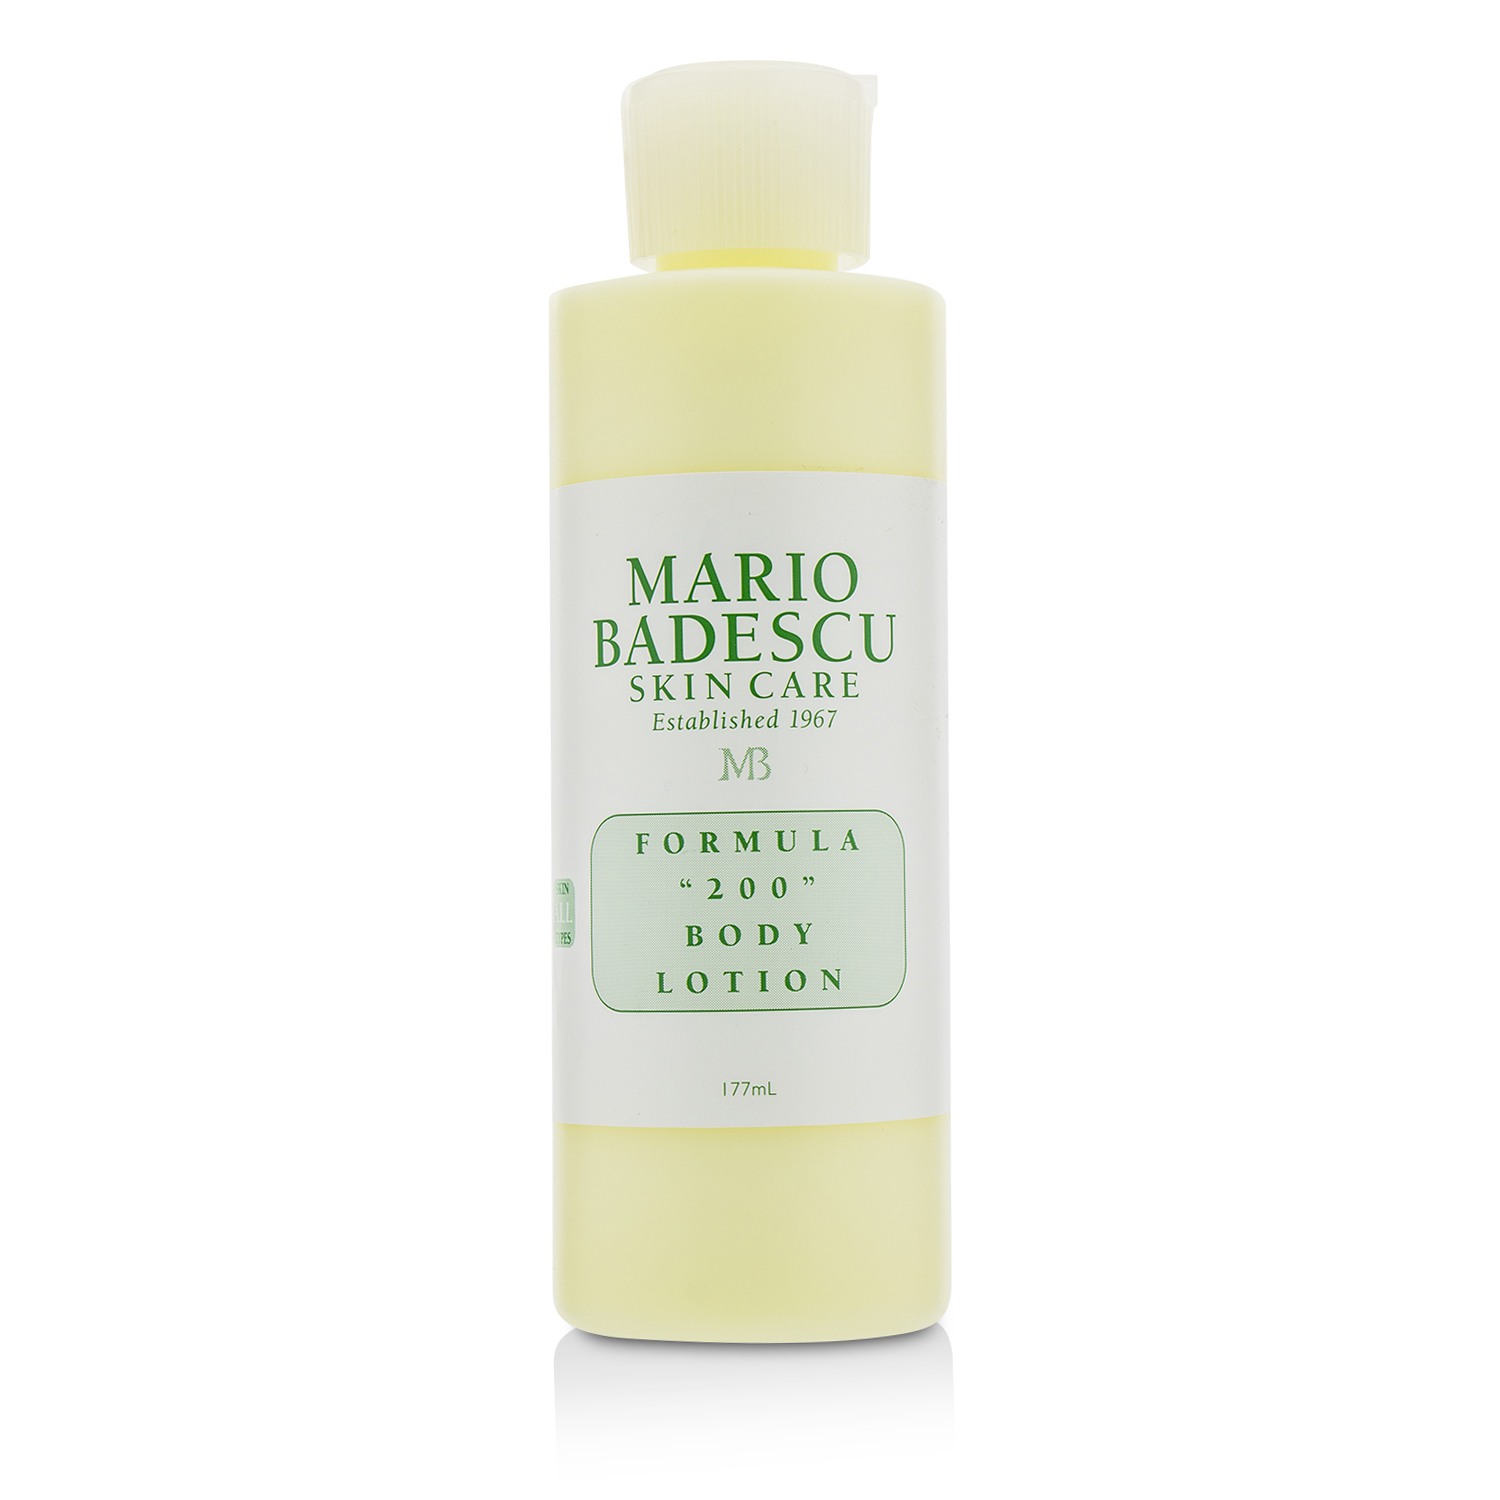 Formula 200 Body Lotion - For All Skin Types Mario Badescu Image